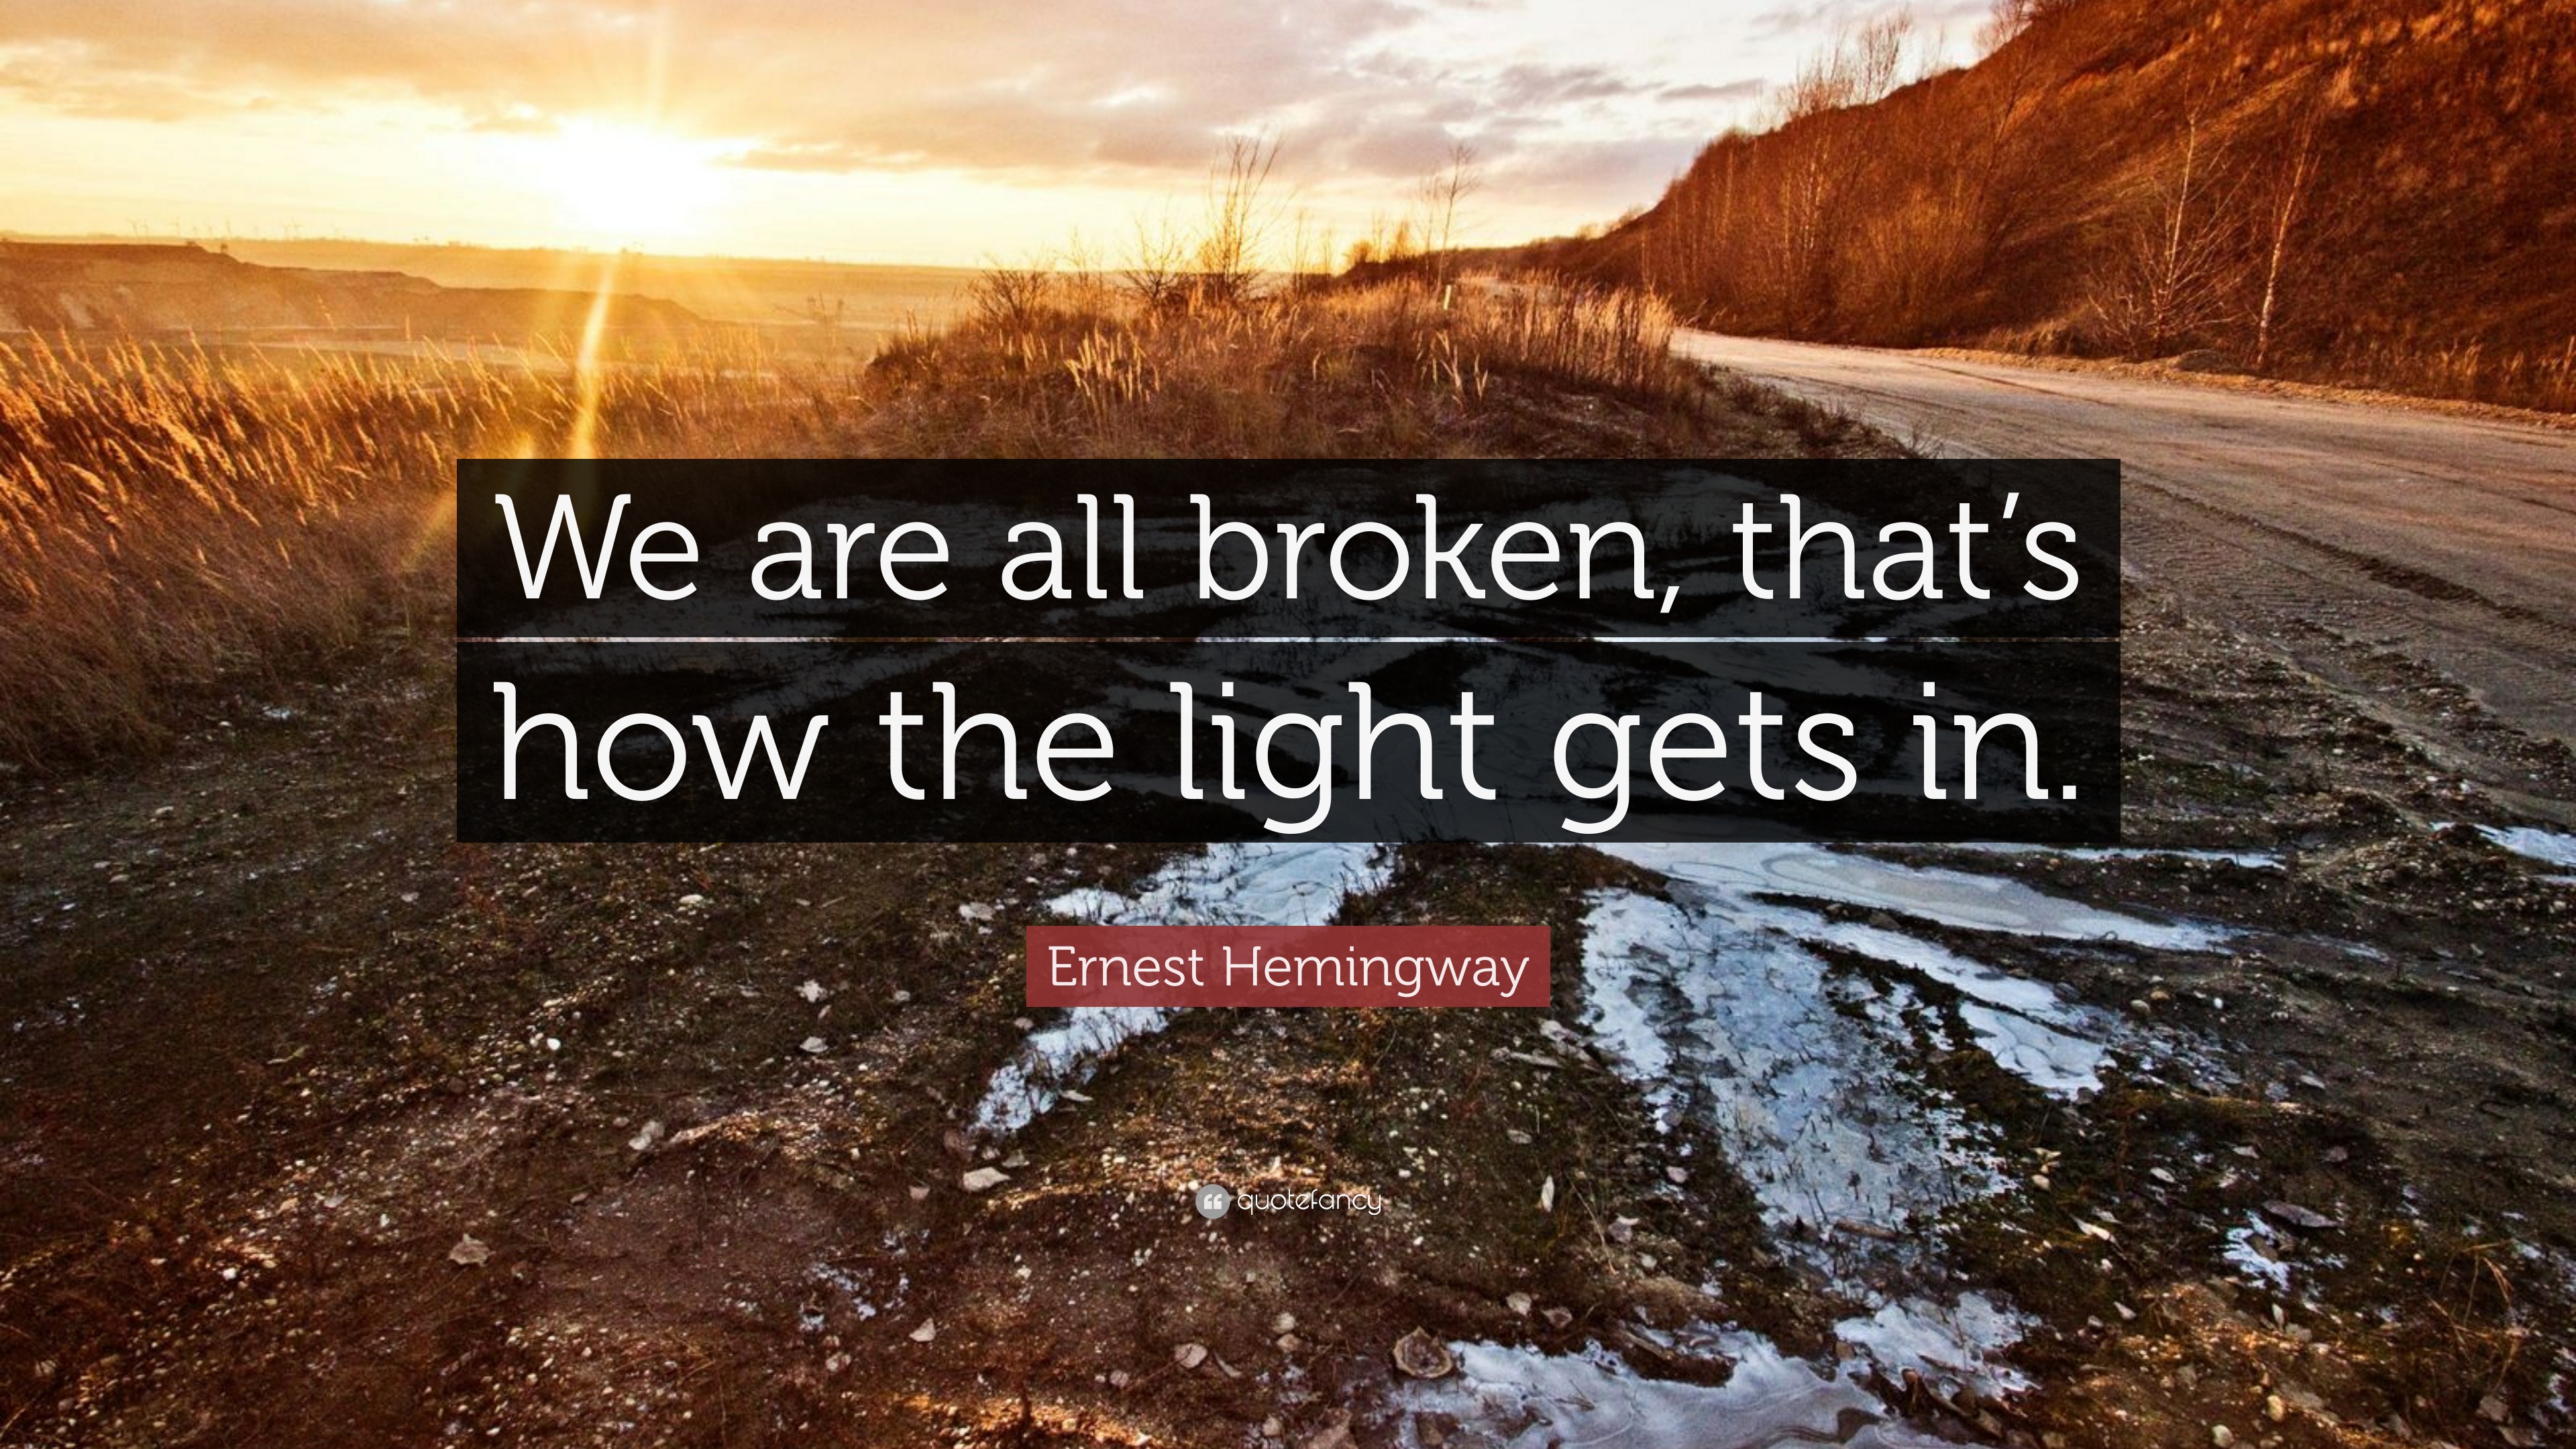 Ernest Hemingway Quote “We are all broken, that’s how the light gets in.”